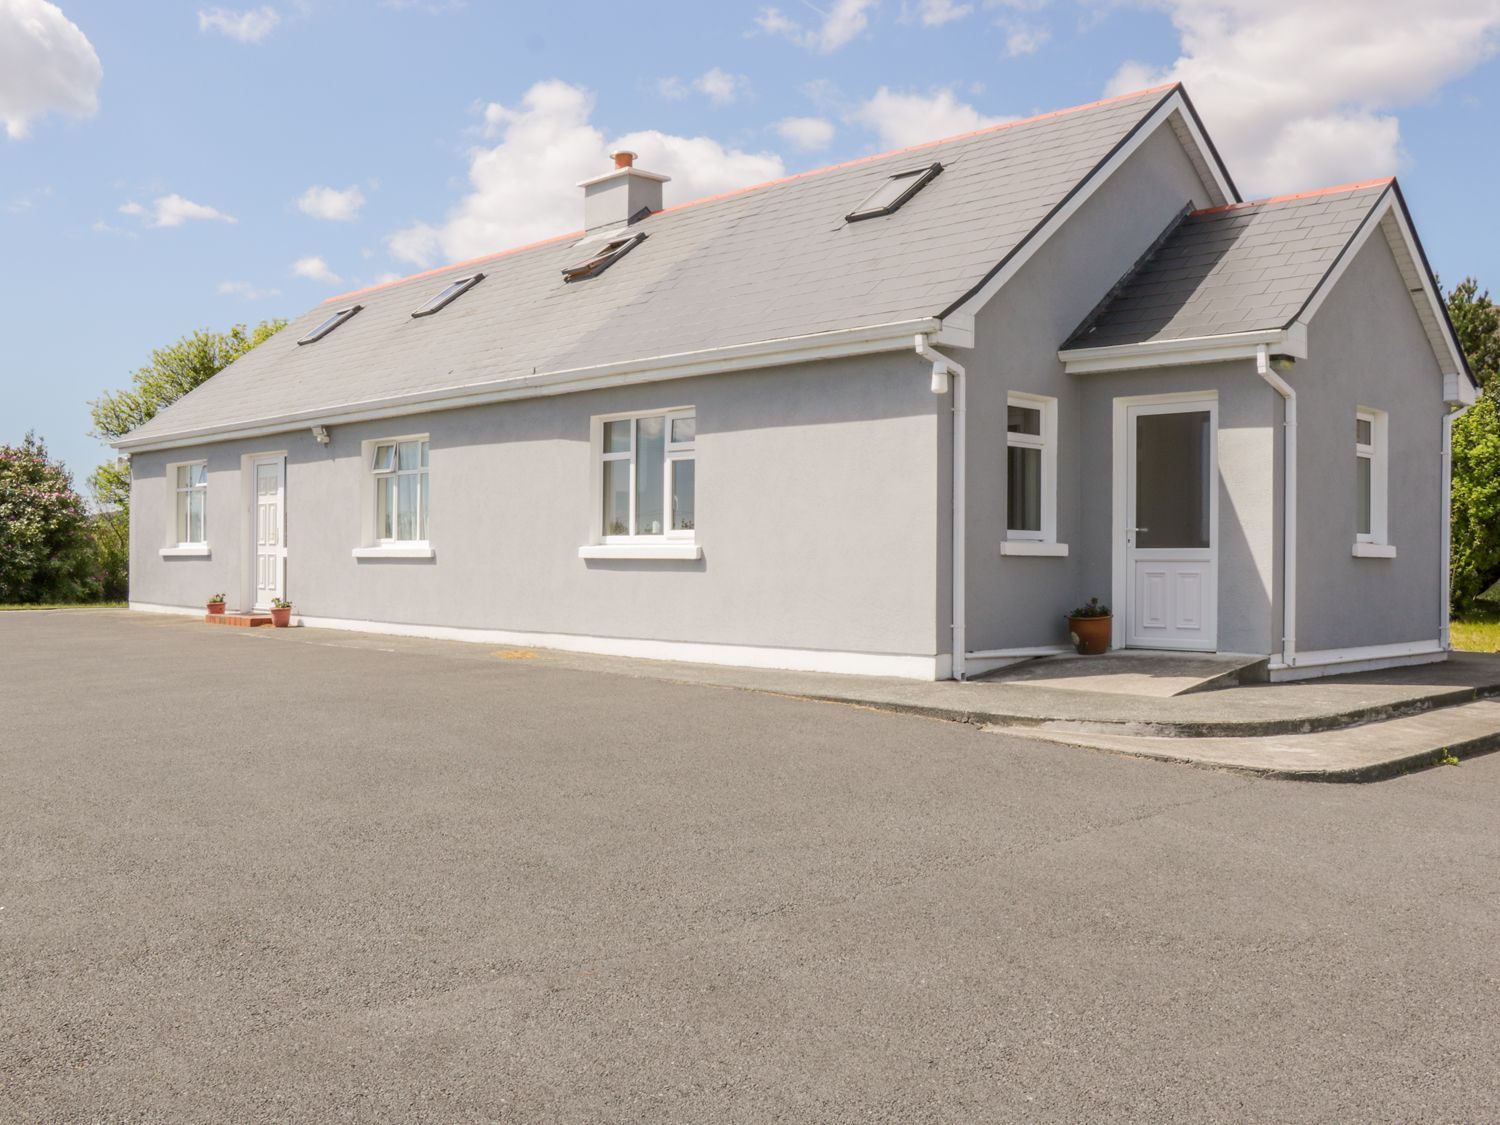 Lake View Cottage - Shancroagh & County Galway - 1011472 - photo 1